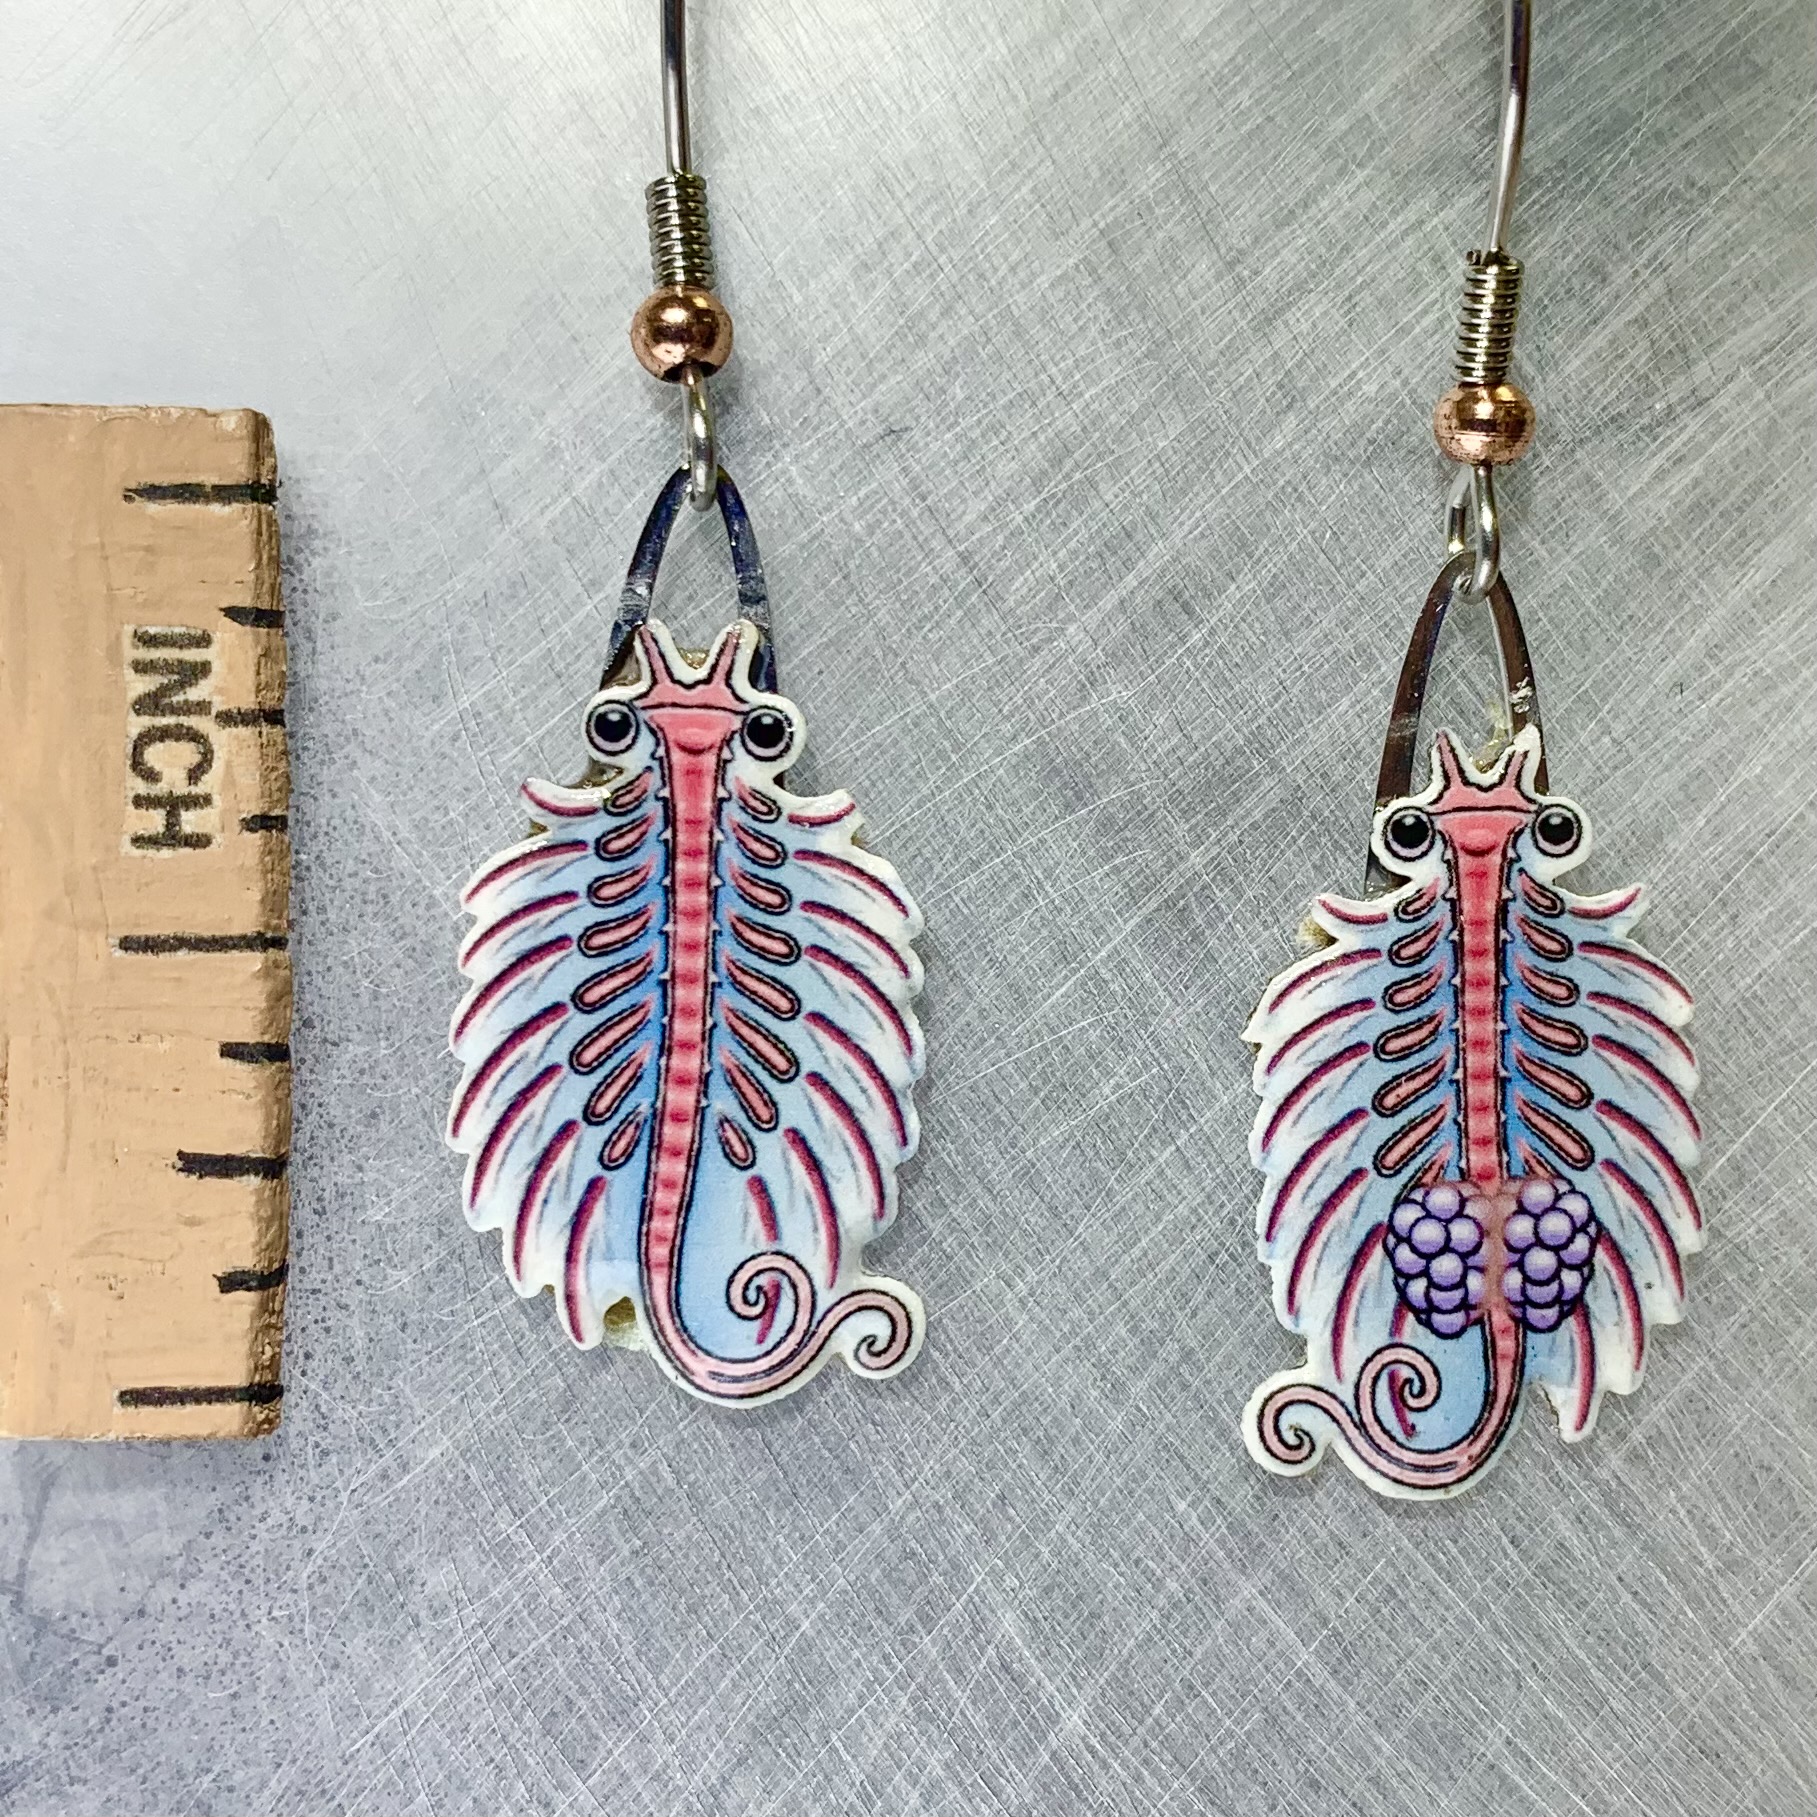 Picture shown is of 1 inch tall pair of earrings of the marine animal the Brine Shrimp.